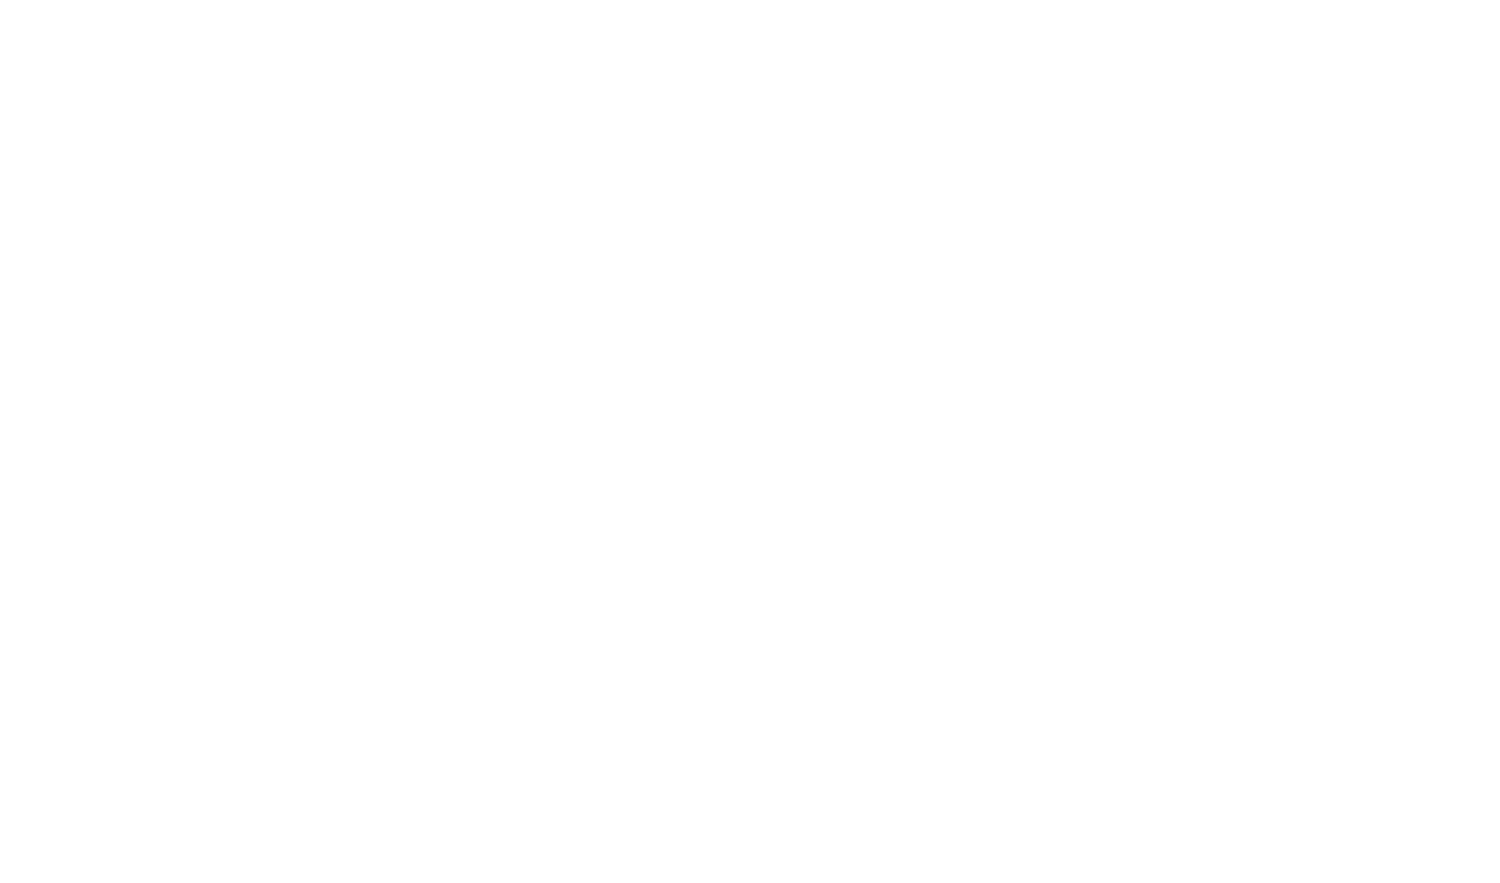 Integrity Insurance Solutions